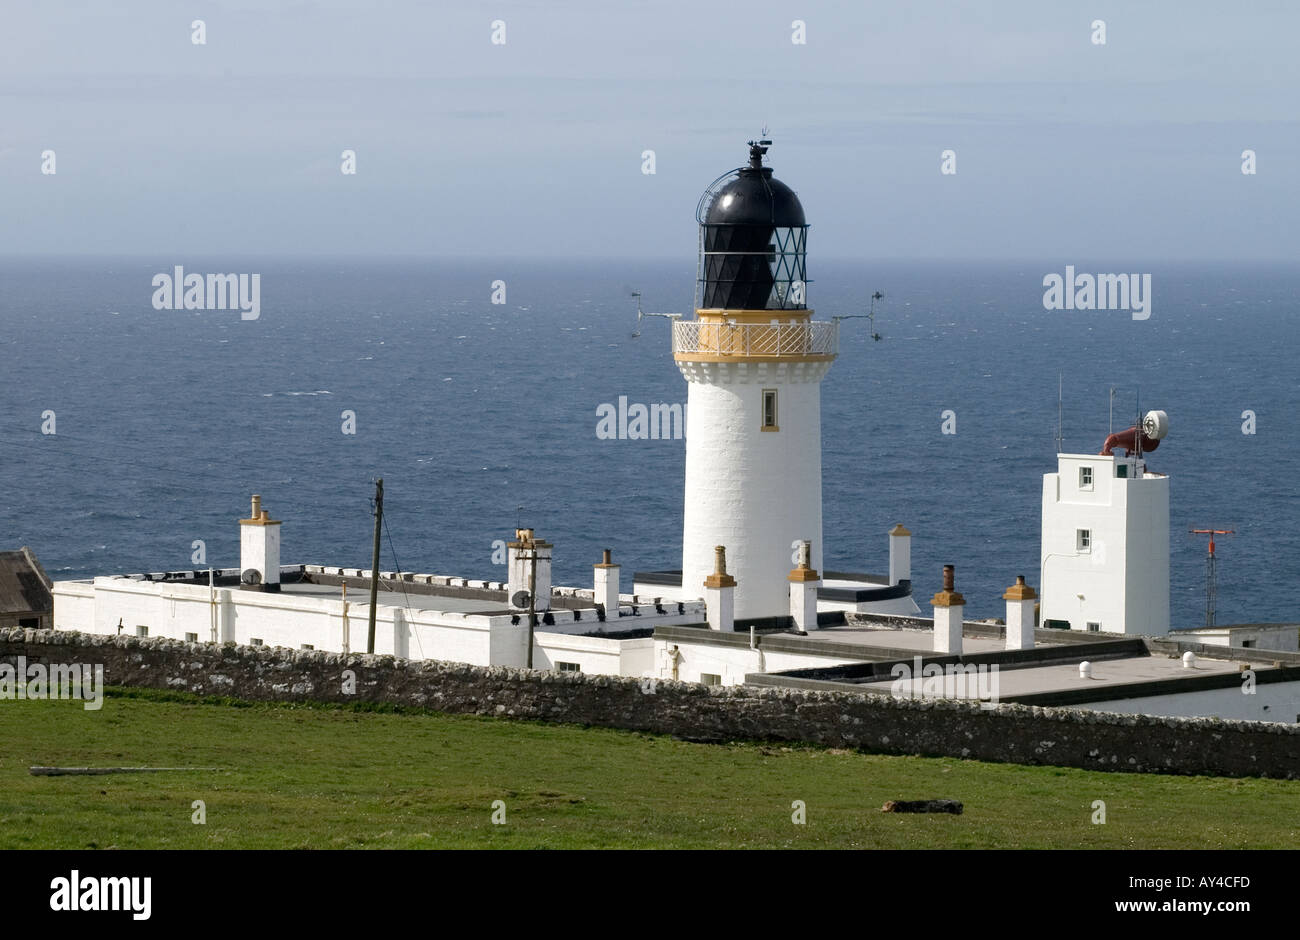 dh Dunnet Head Lighthouse DUNNET HEAD CAITHNESS White washed wall light tower beacon building overlooking Pentland Firth Stock Photo